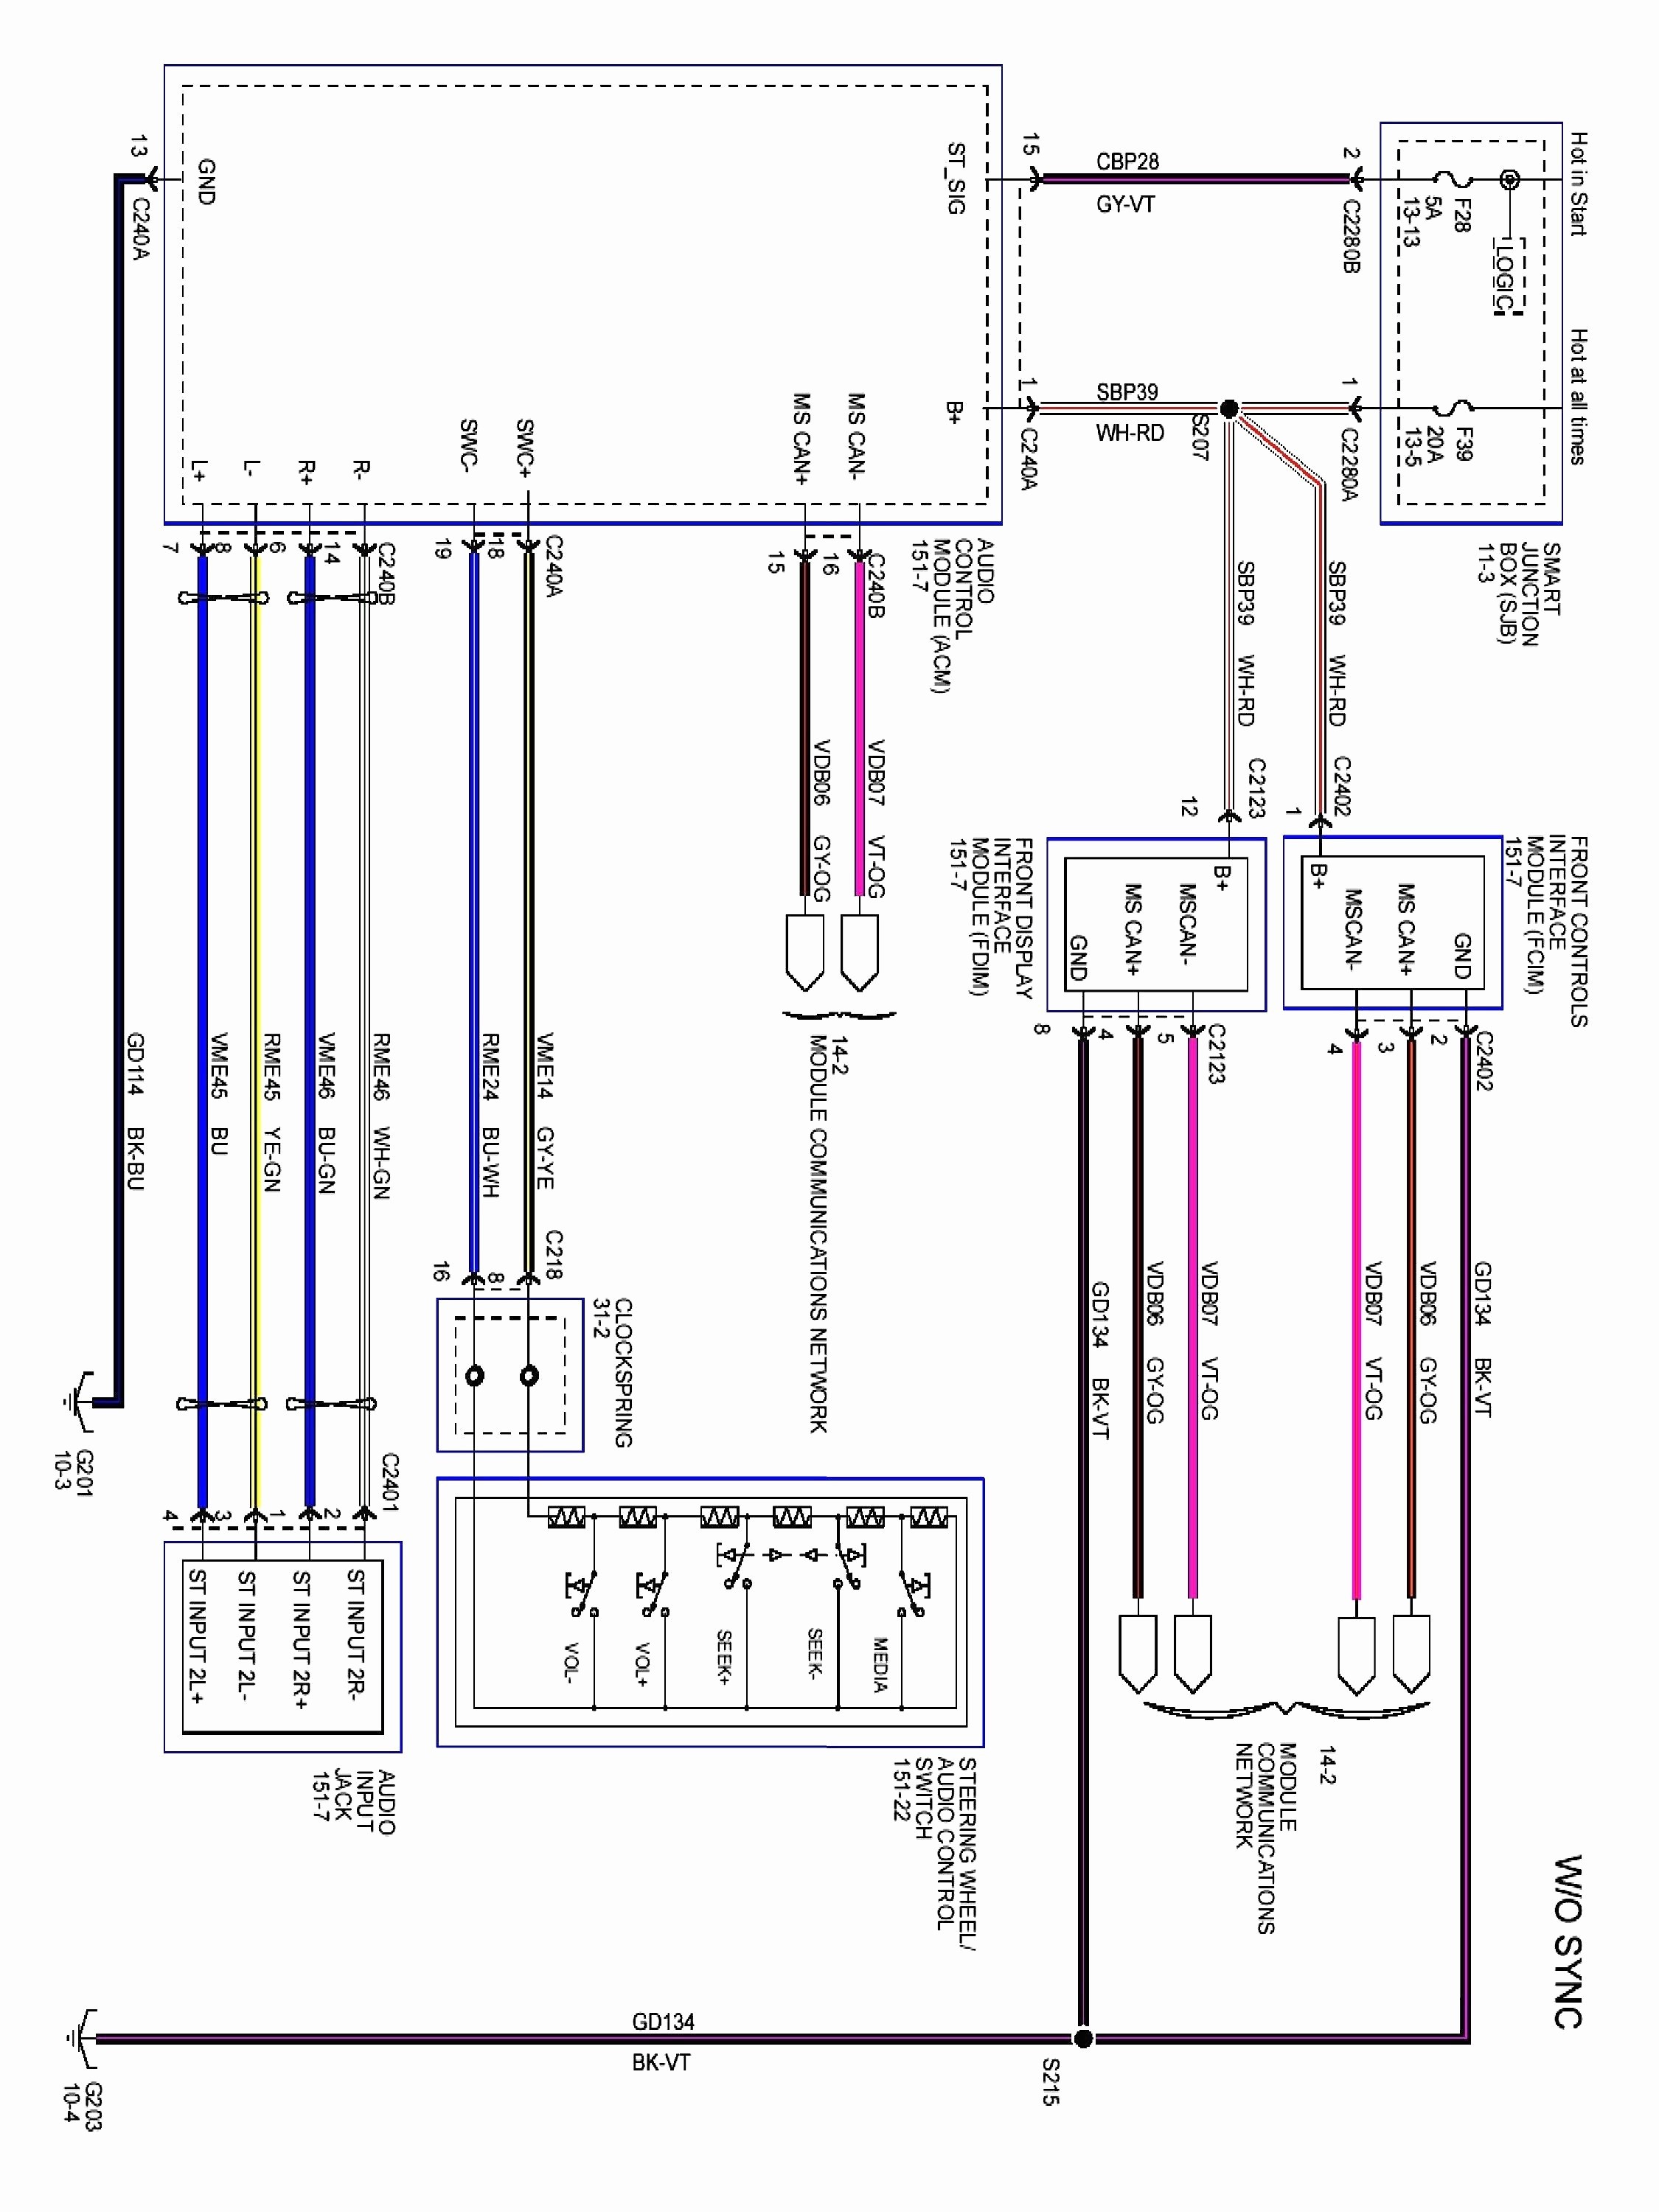 Amplifier Wiring Diagram Unique Wiring Diagram Od Rv Park Motorcycle Wiring Diagram Collection